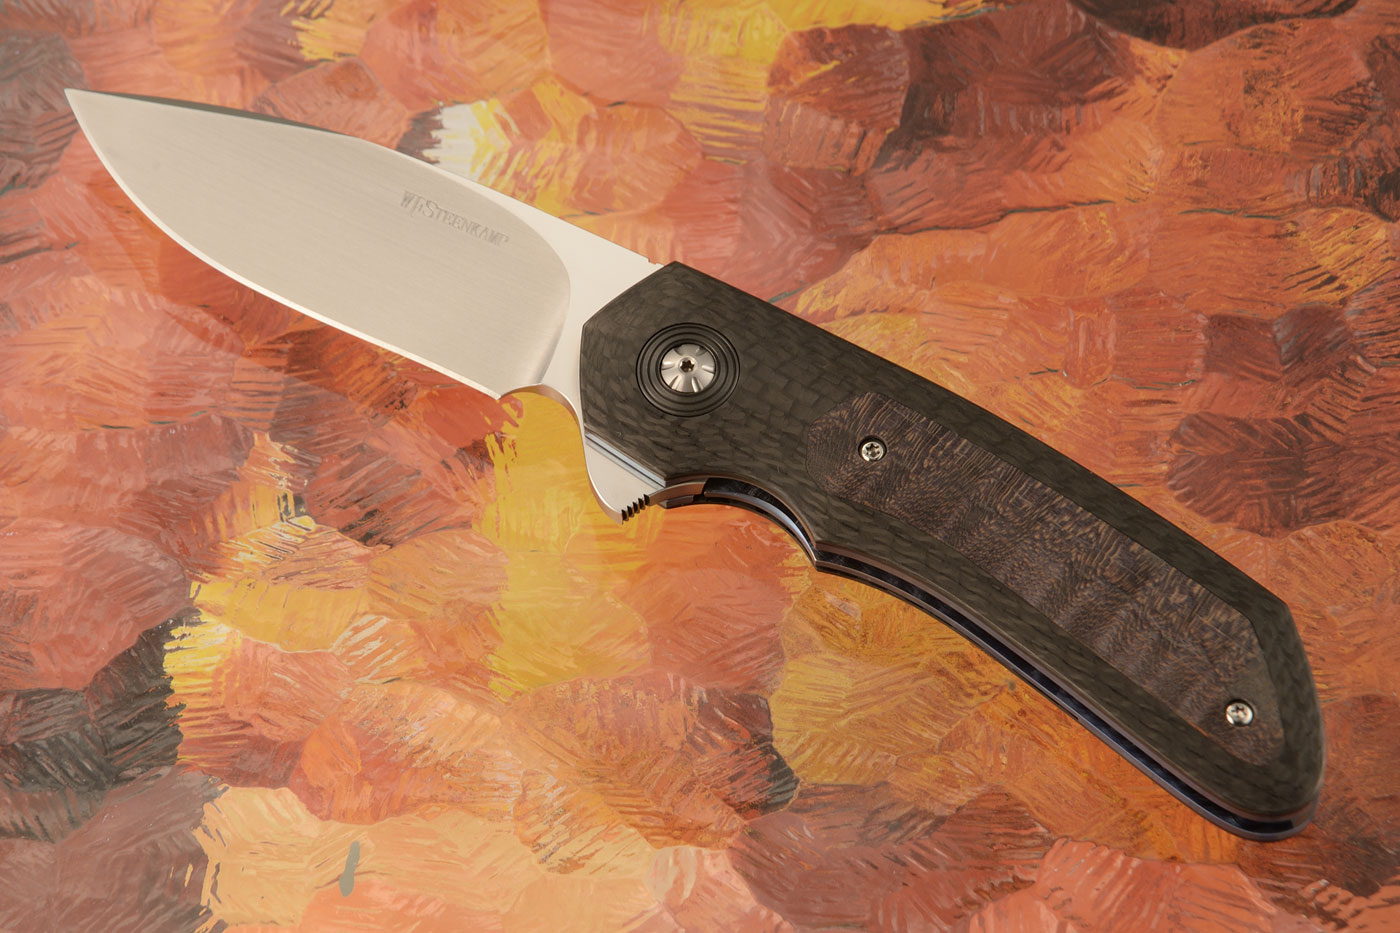 Nomad Jr Flipper with Carbon Fiber and Snakeskin Sycamore (IKBS) - M390